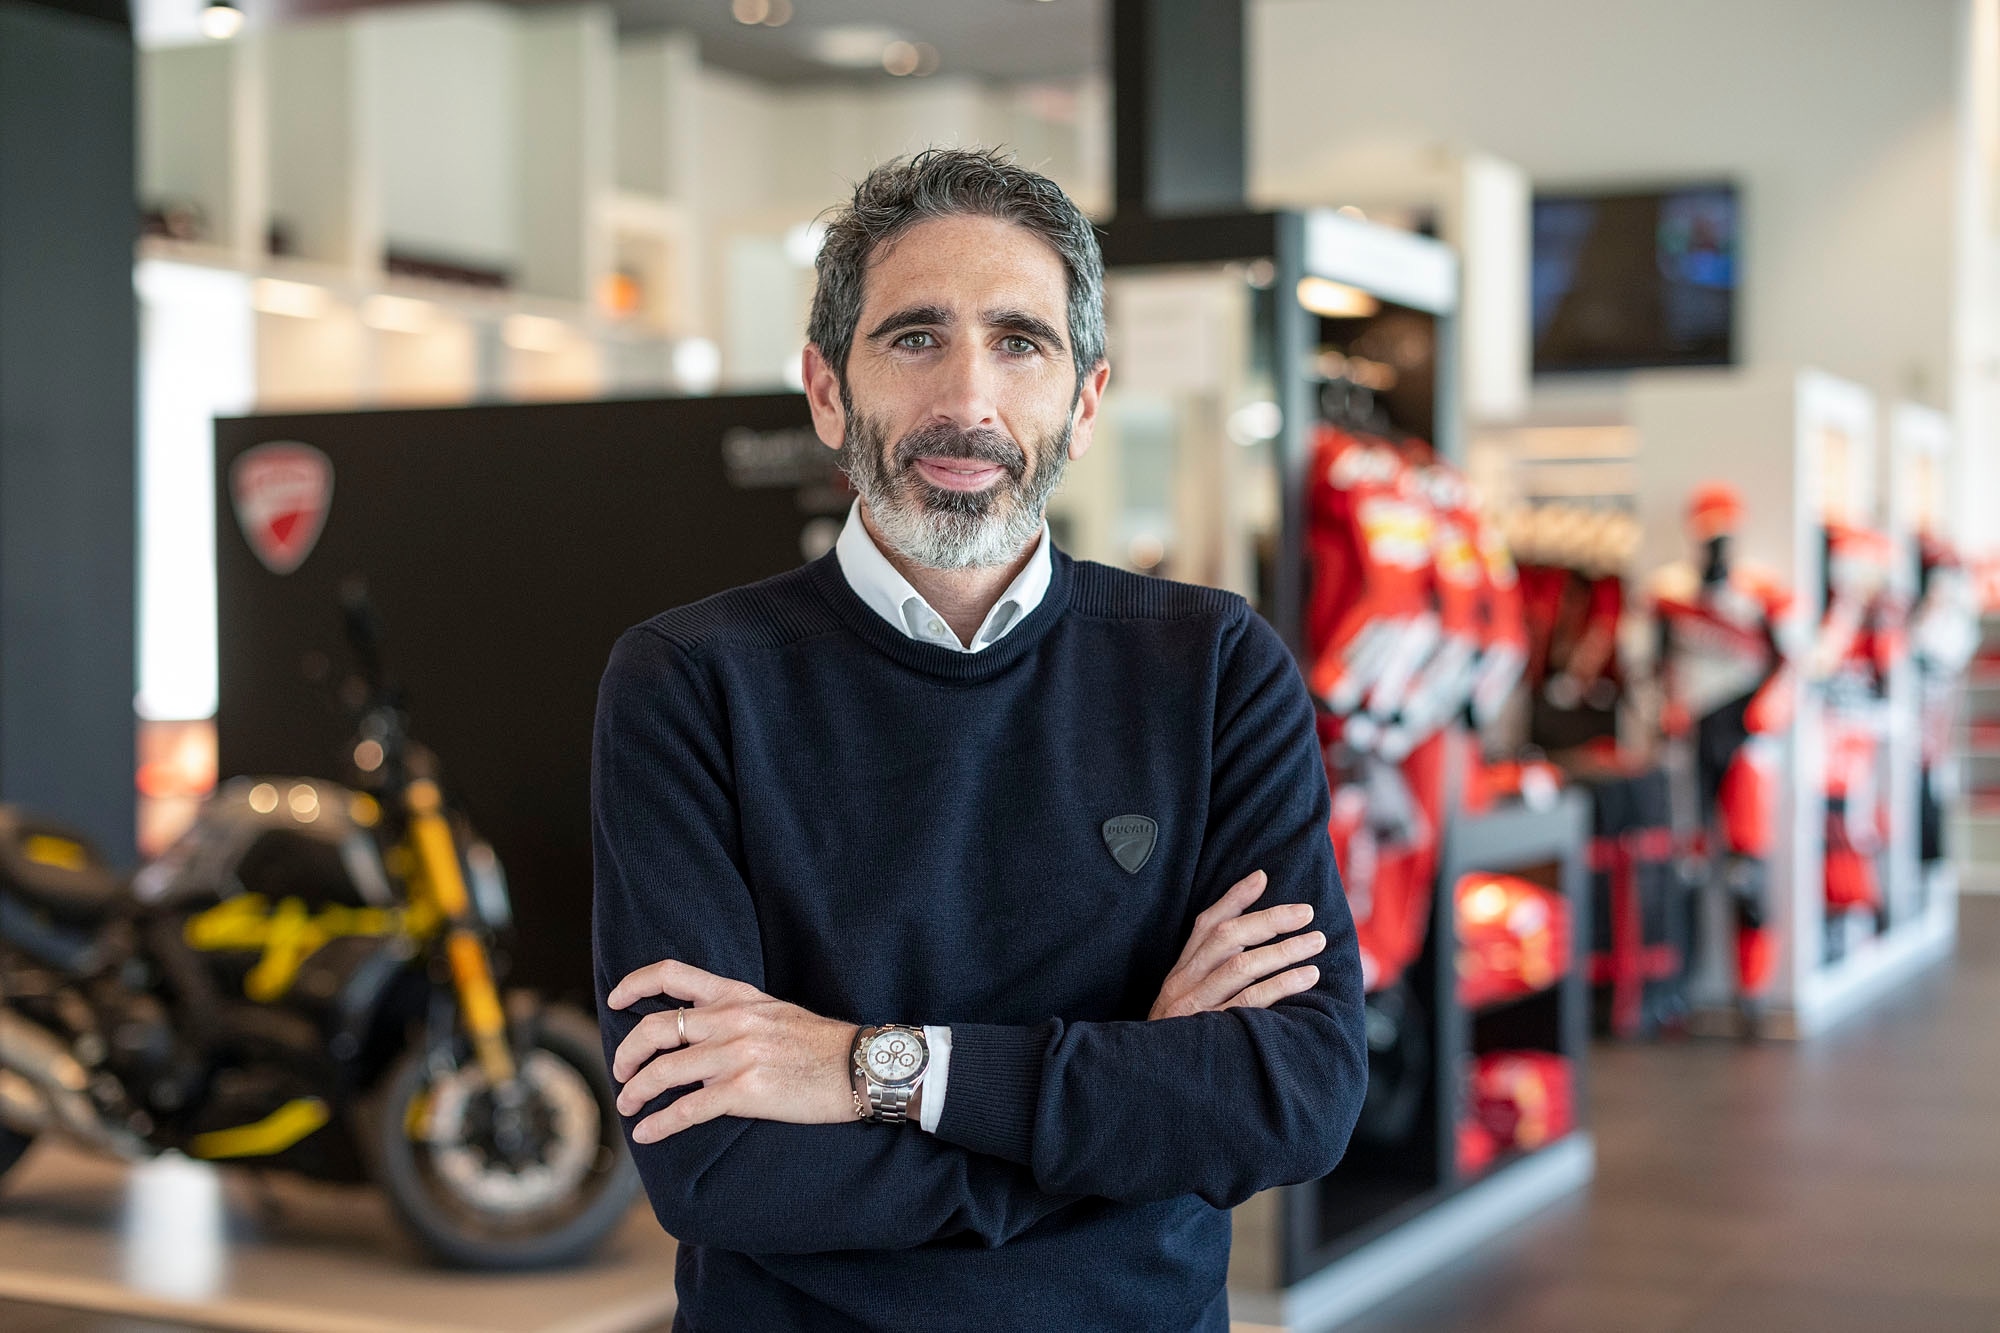 Francesco Milicia, the VP of Global Sales and After Sales for Ducati